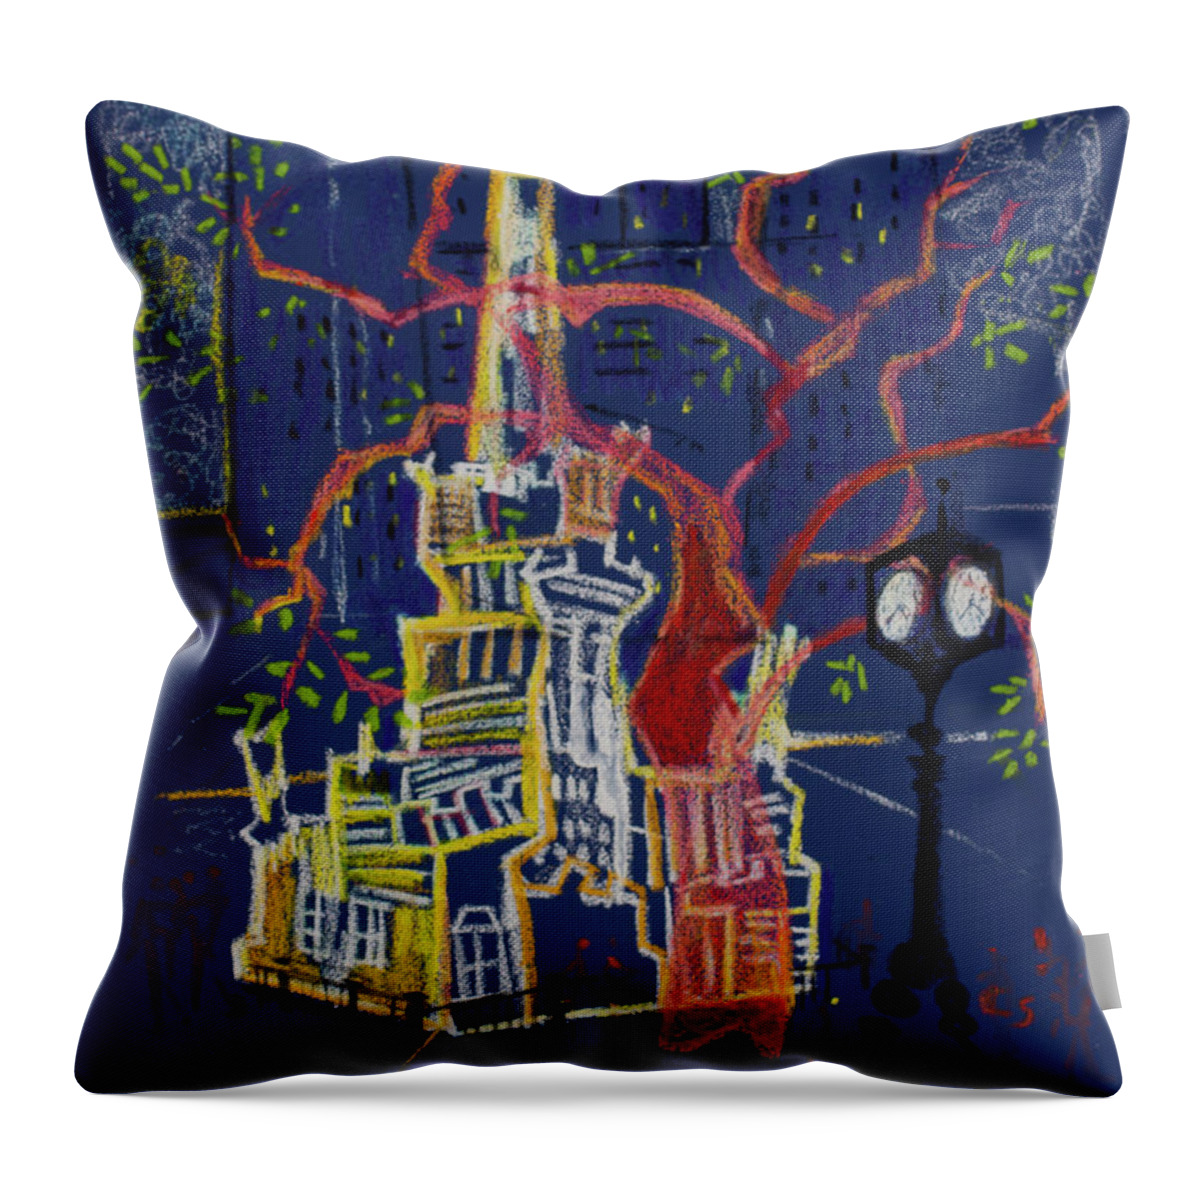 Chicago Water Tower Throw Pillow featuring the painting Chicago Water Tower by Cherie Salerno